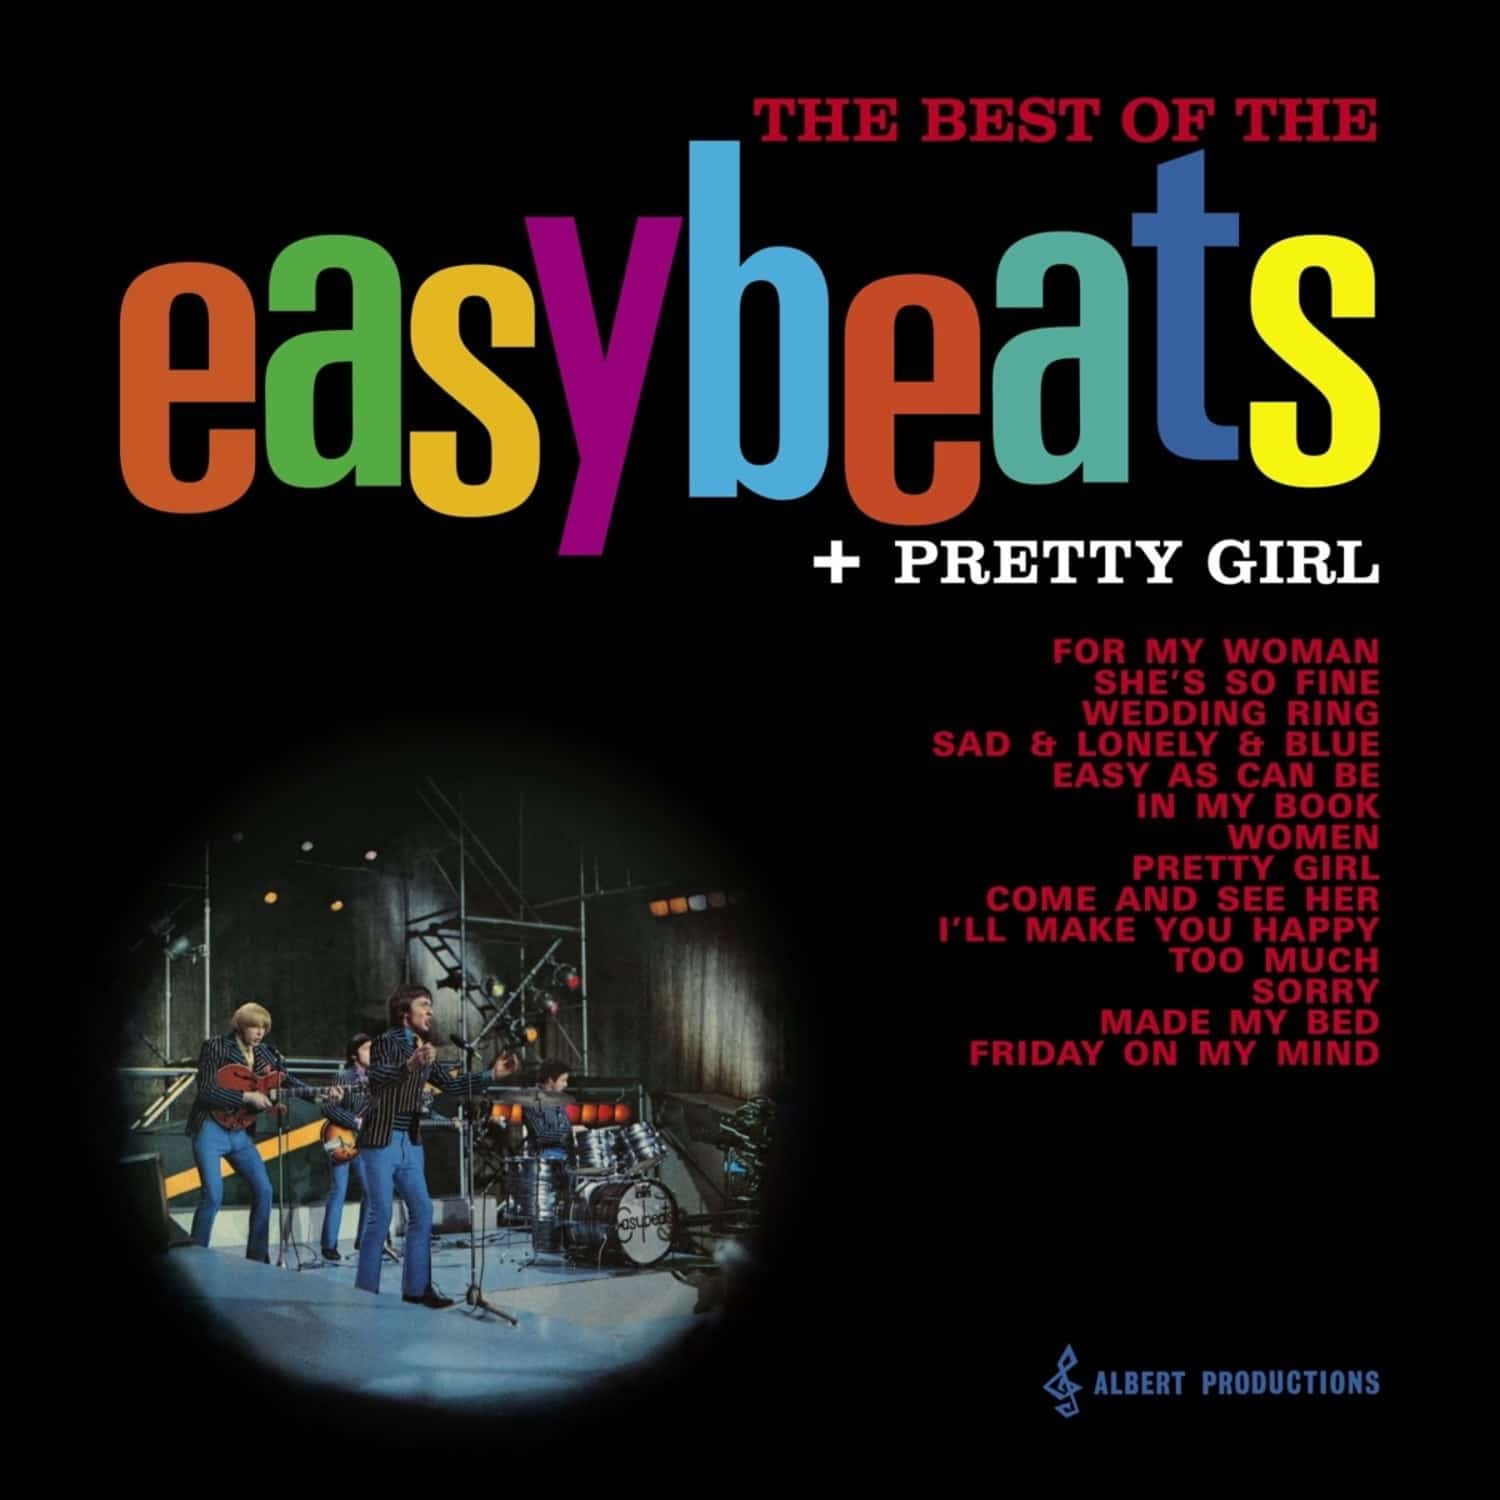 The Easybeats - THE BEST OF THE EASYBEATS+PRETTY GIRL 